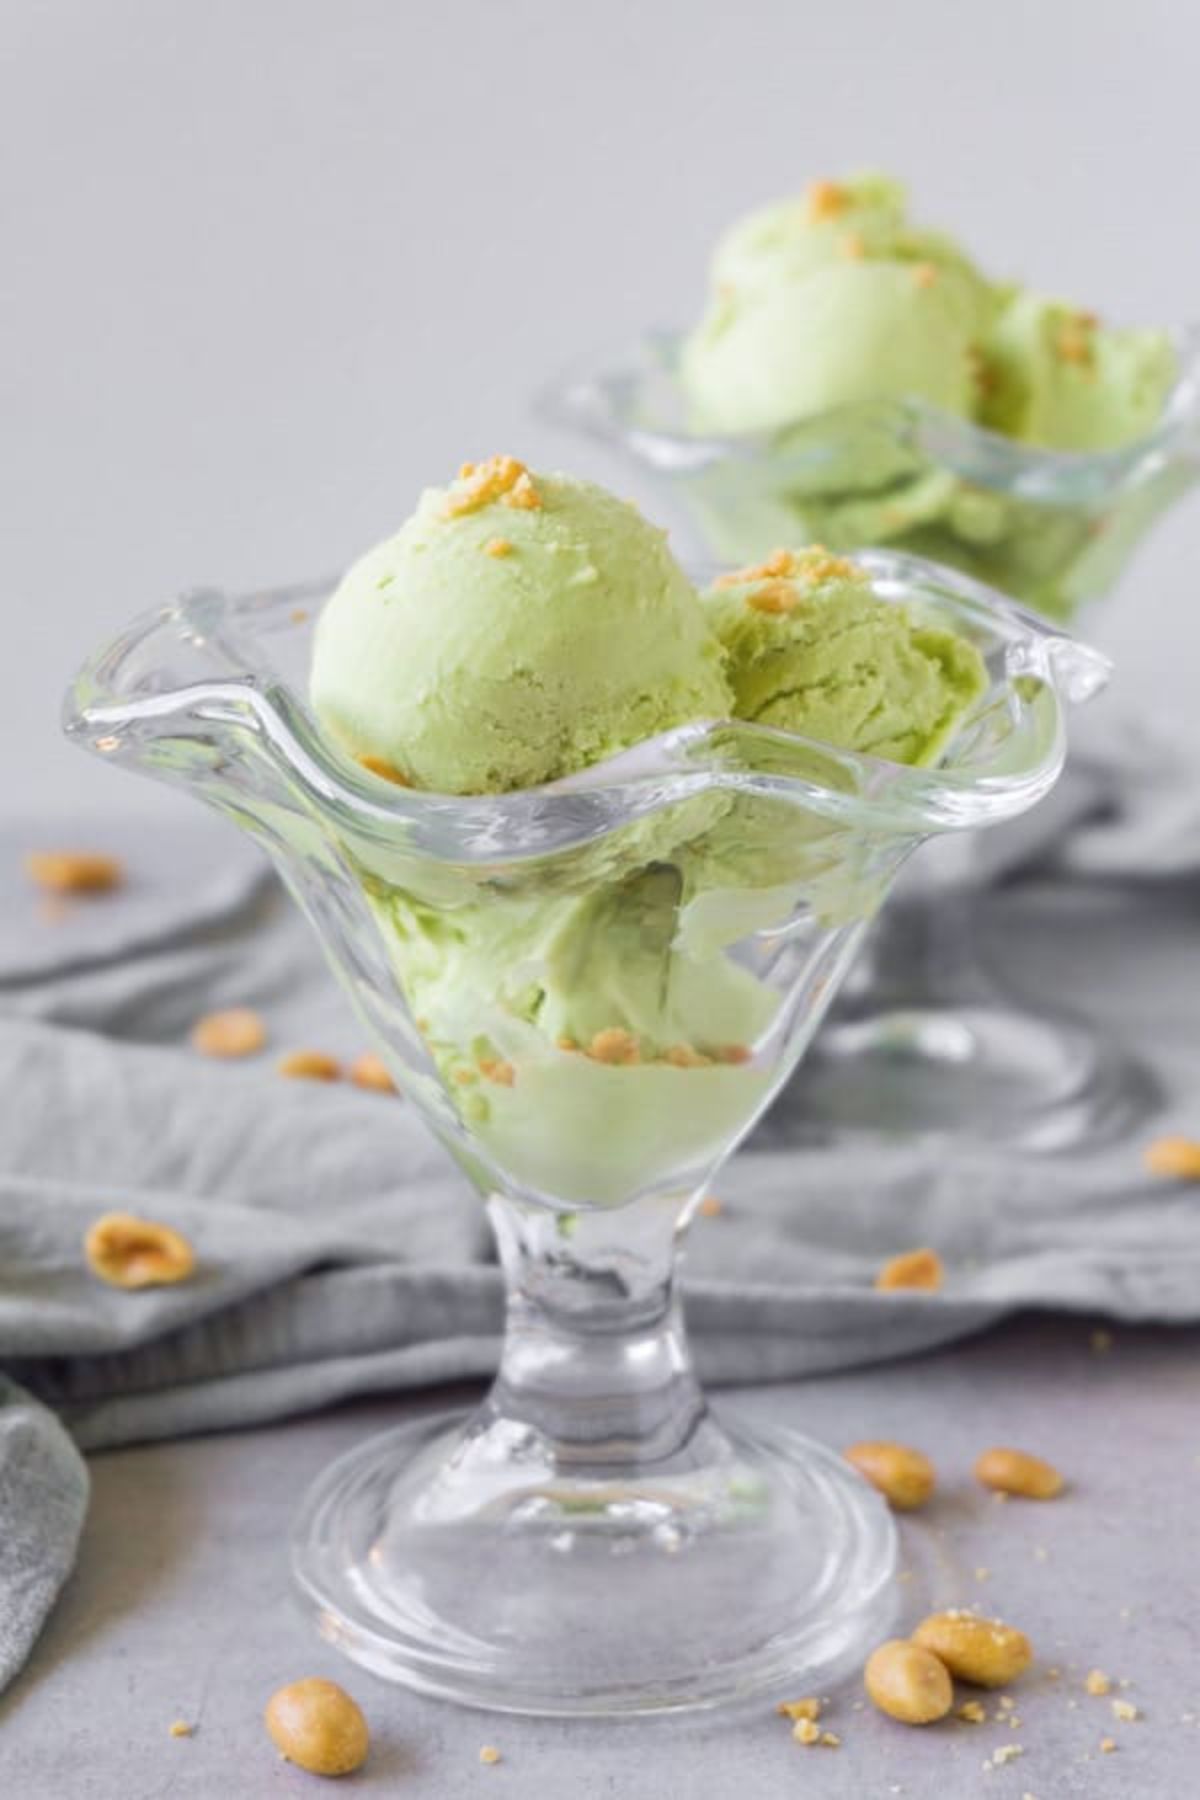 On a gay background with a gray cloth behind, are 2 ice cream glass dishes filled with 3 scoops of green ice cream and toppped with peanuts